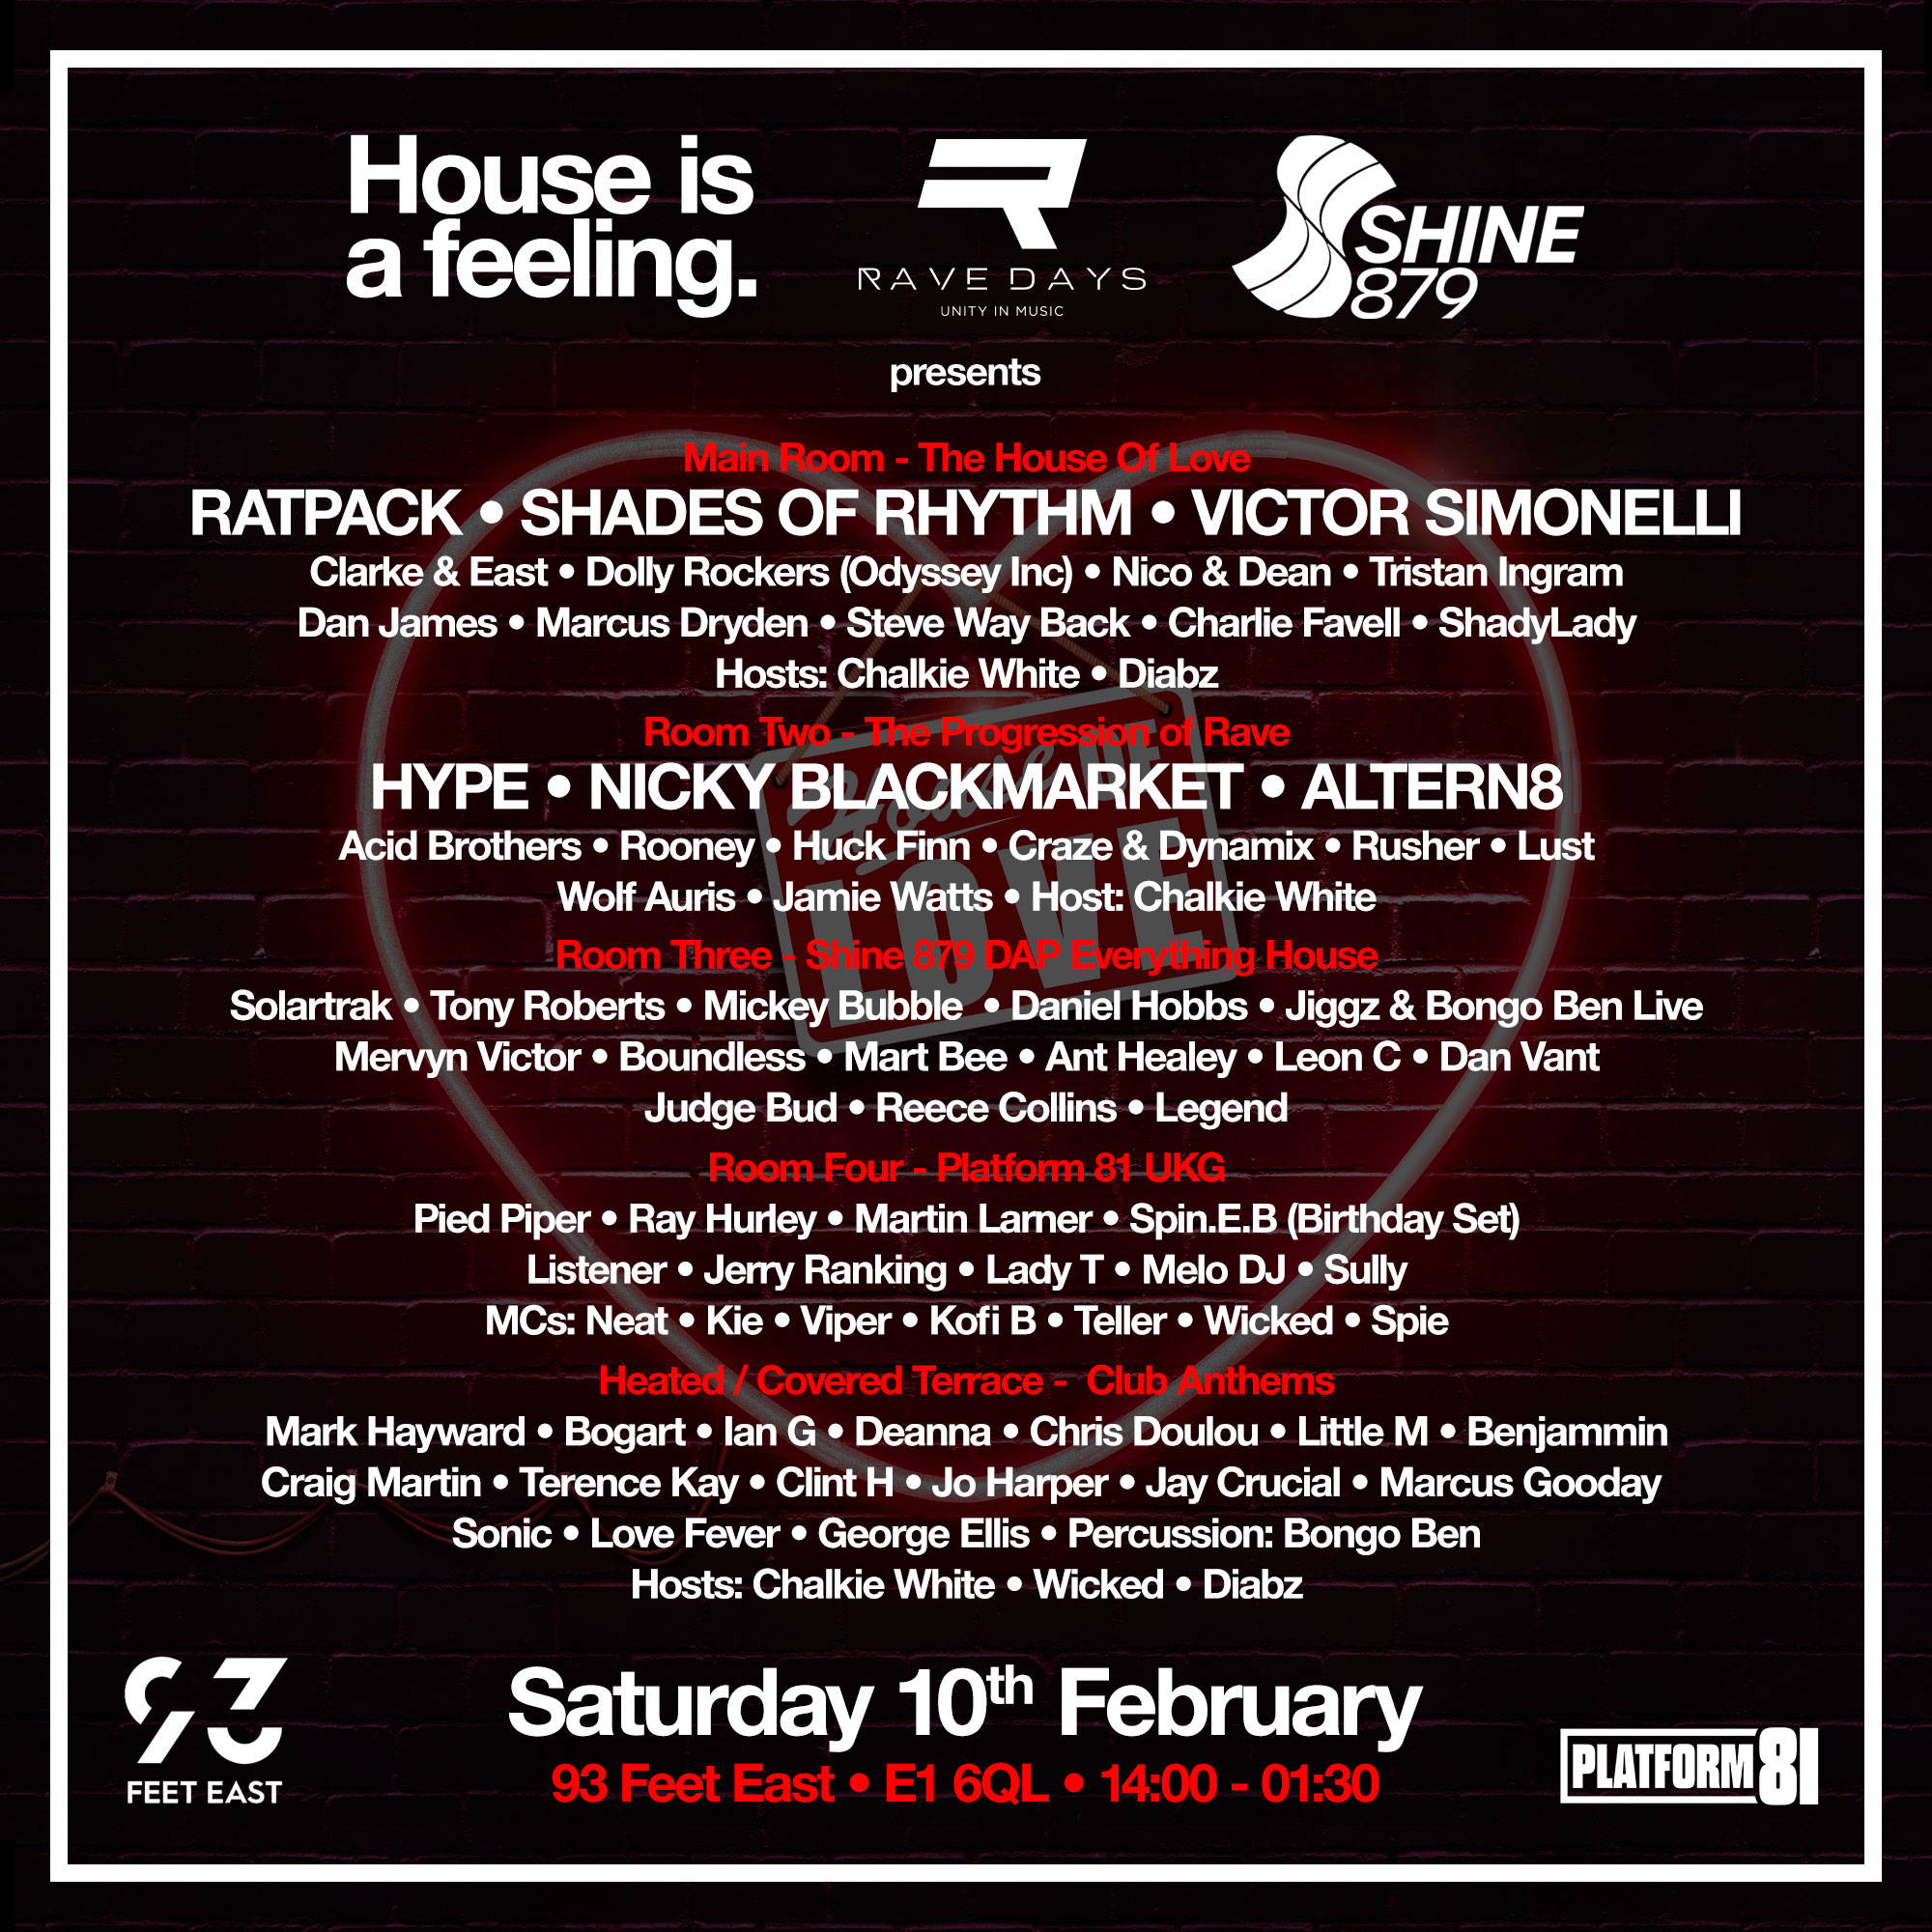 House is a feeling,Rave days & Shine 879 DAB present The House Of Love (NO ID NO ENTRY)  - フライヤー裏